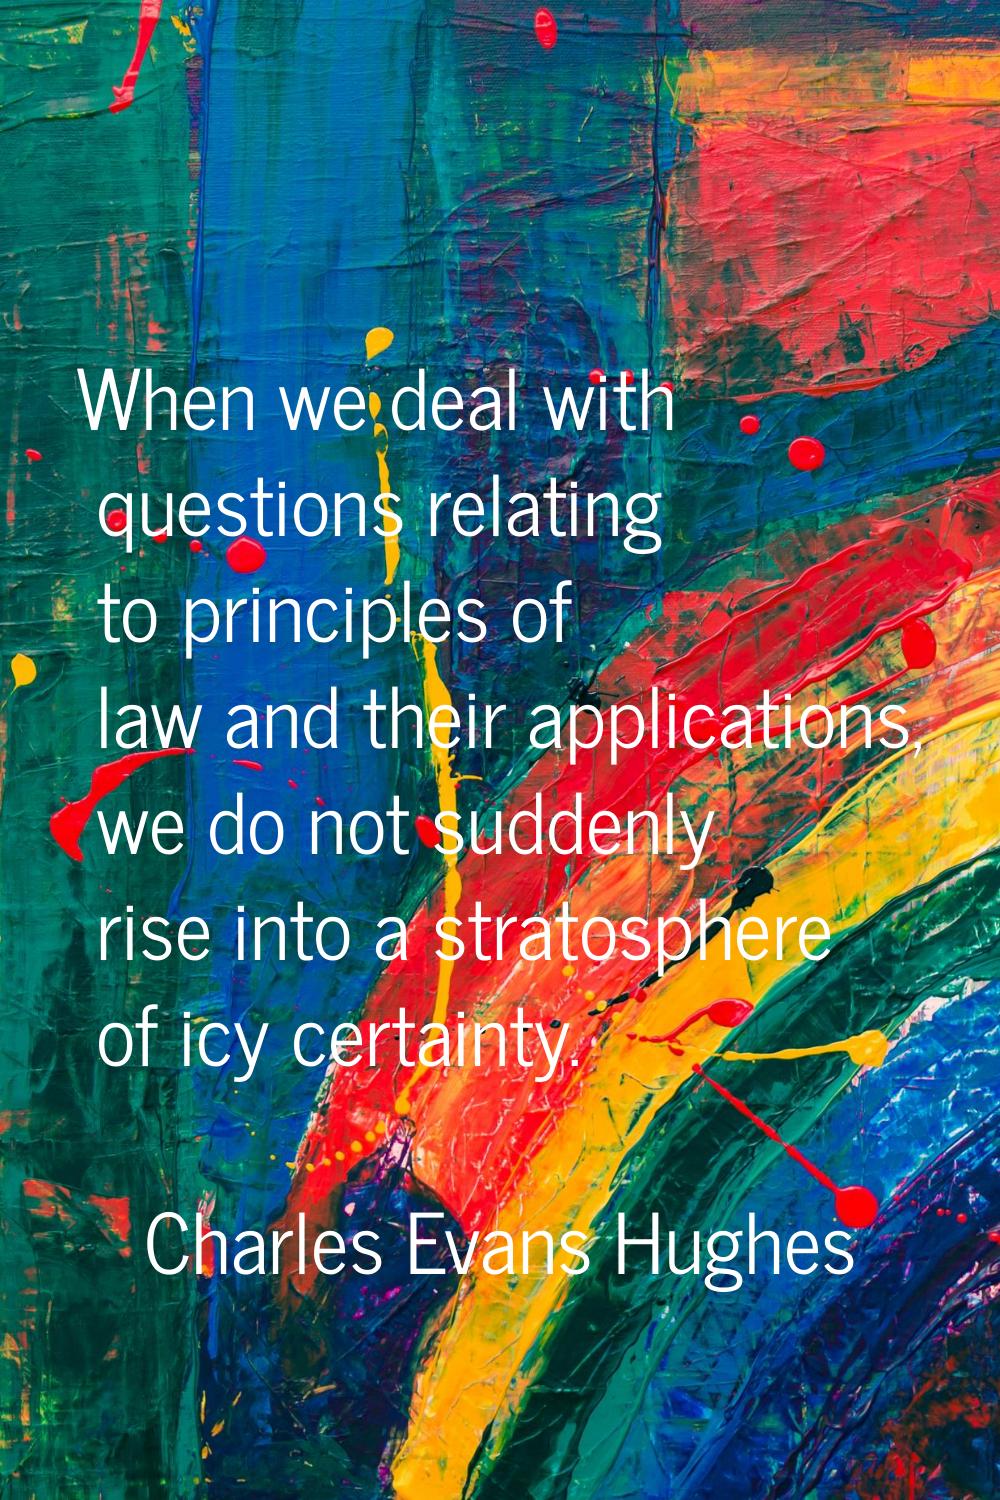 When we deal with questions relating to principles of law and their applications, we do not suddenl